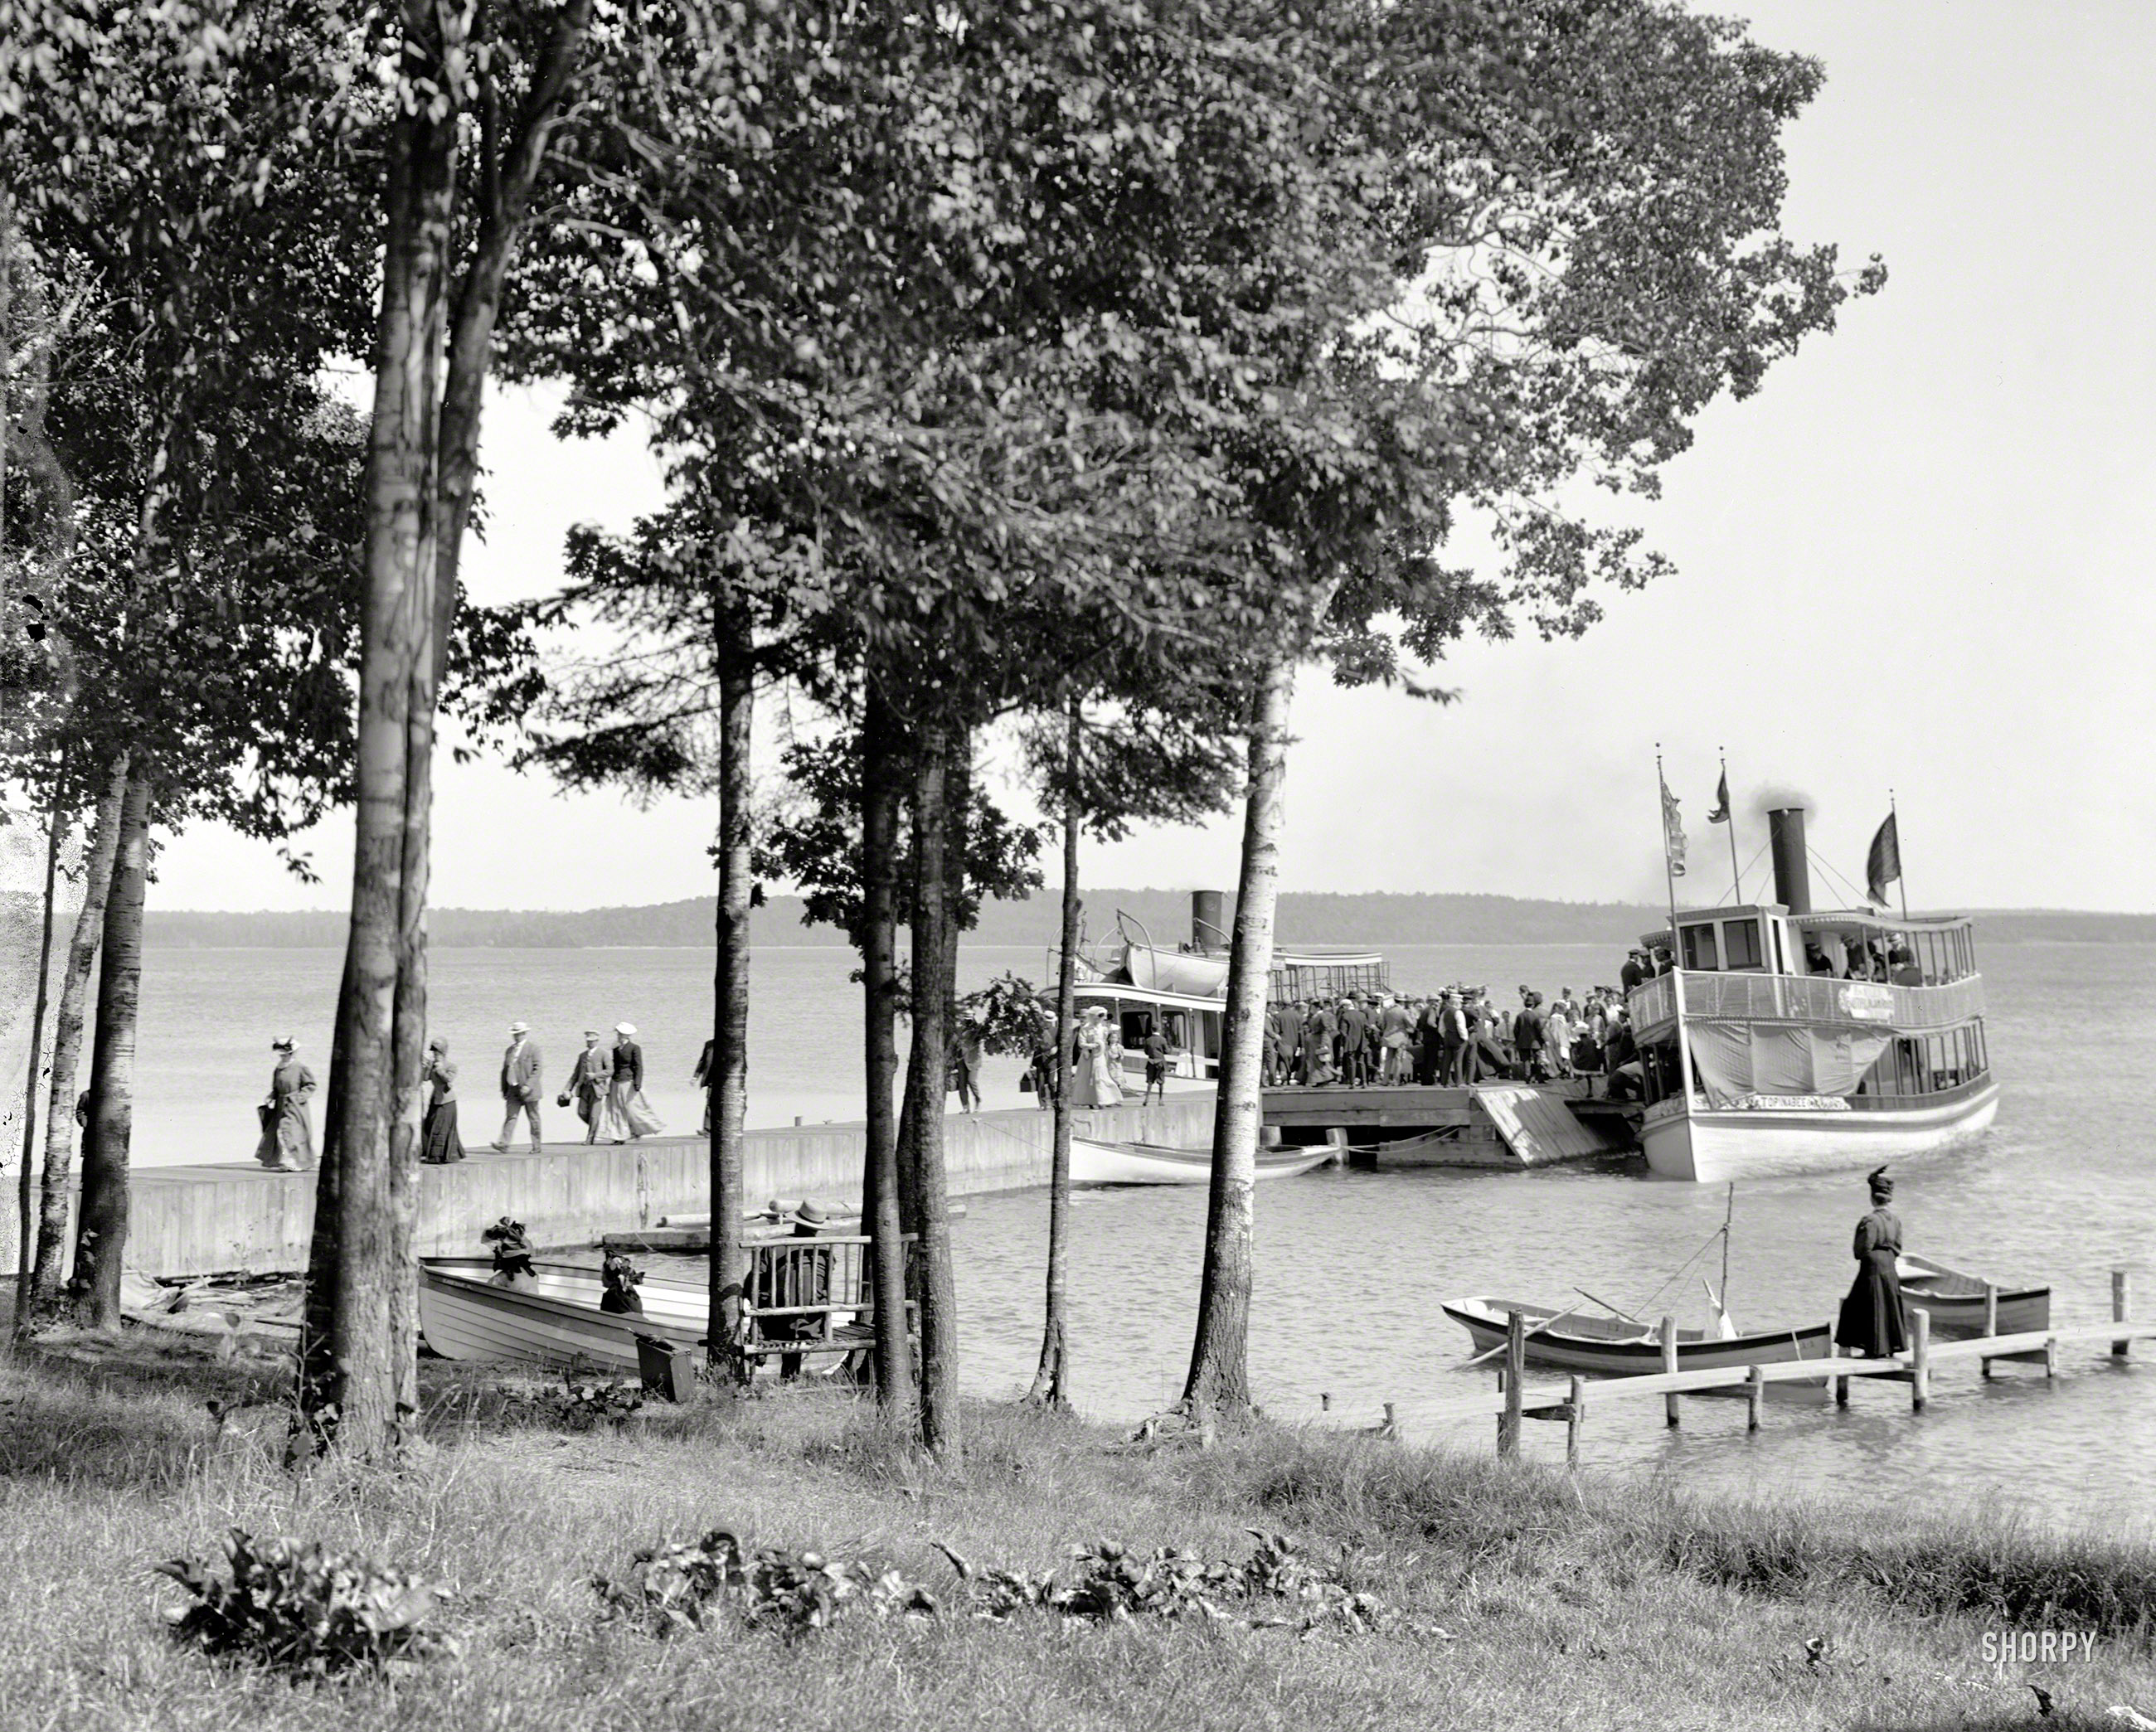 Circa 1910. "Topinabee Landing, Hamill's Inland Route, Cheboygan-Petoskey, Michigan." Excursionists on the dock, just in from an outing. View full size.